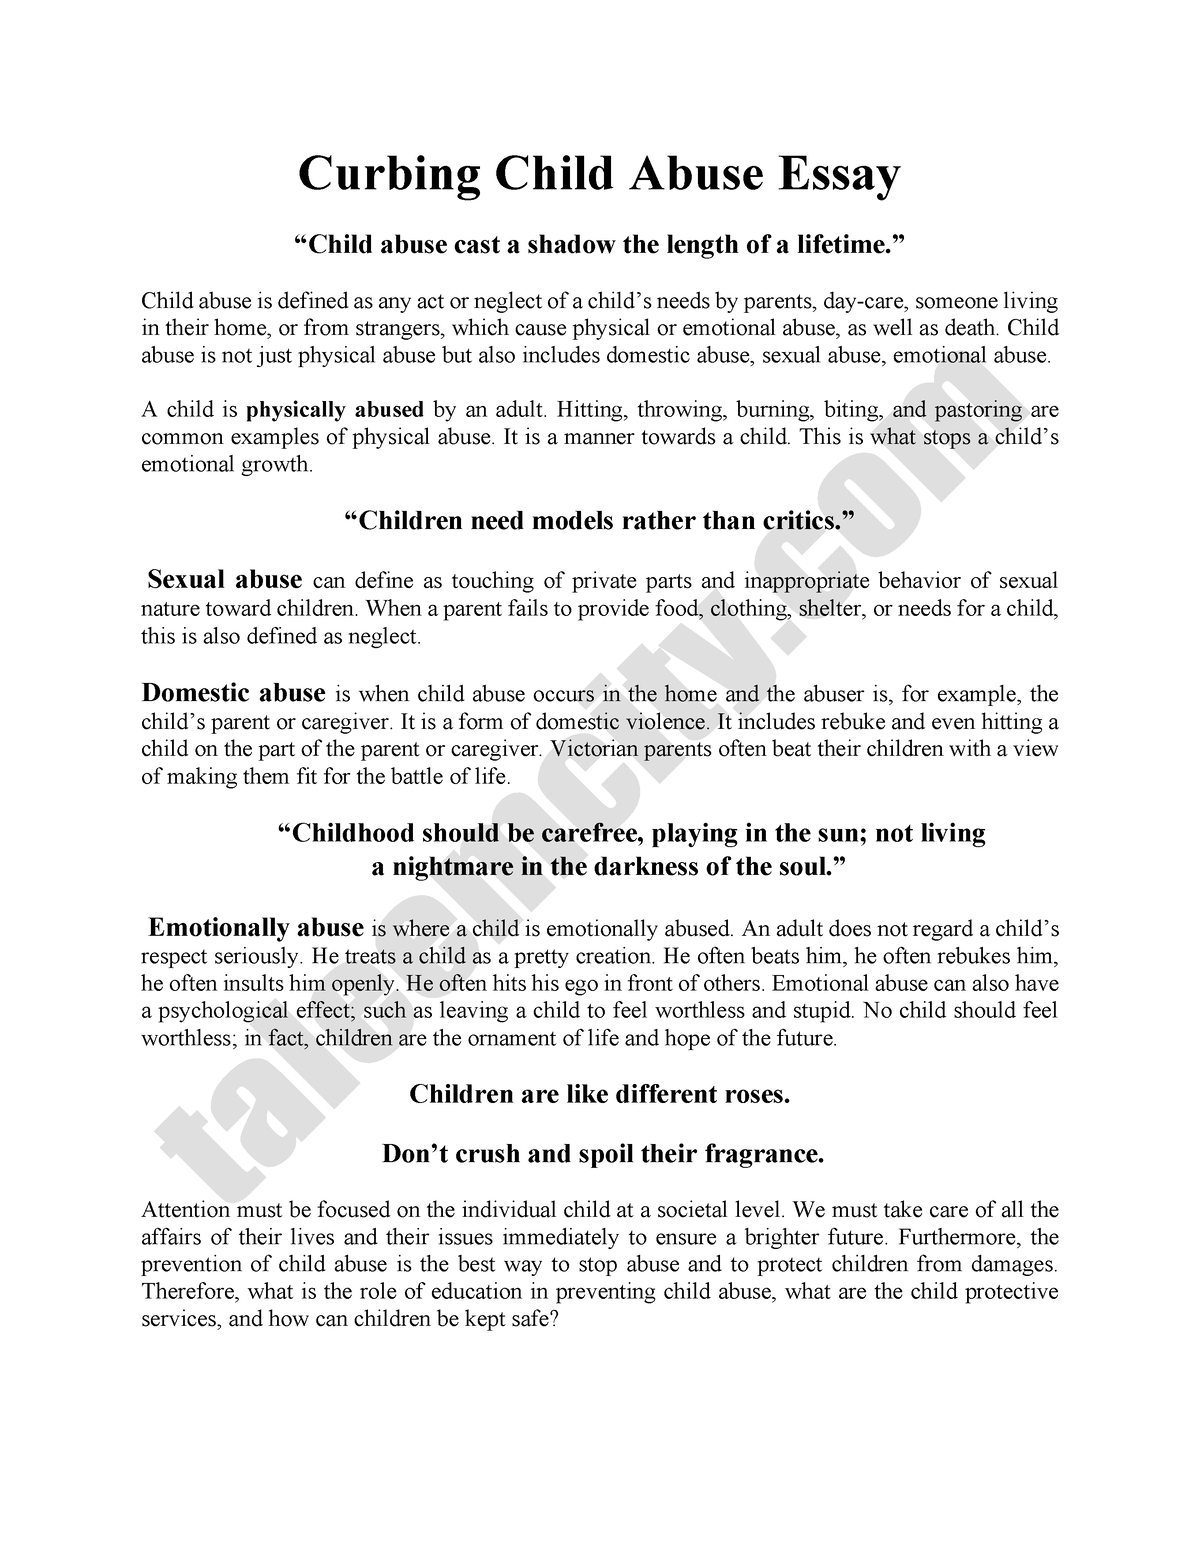 curbing child abusing essay with quotations